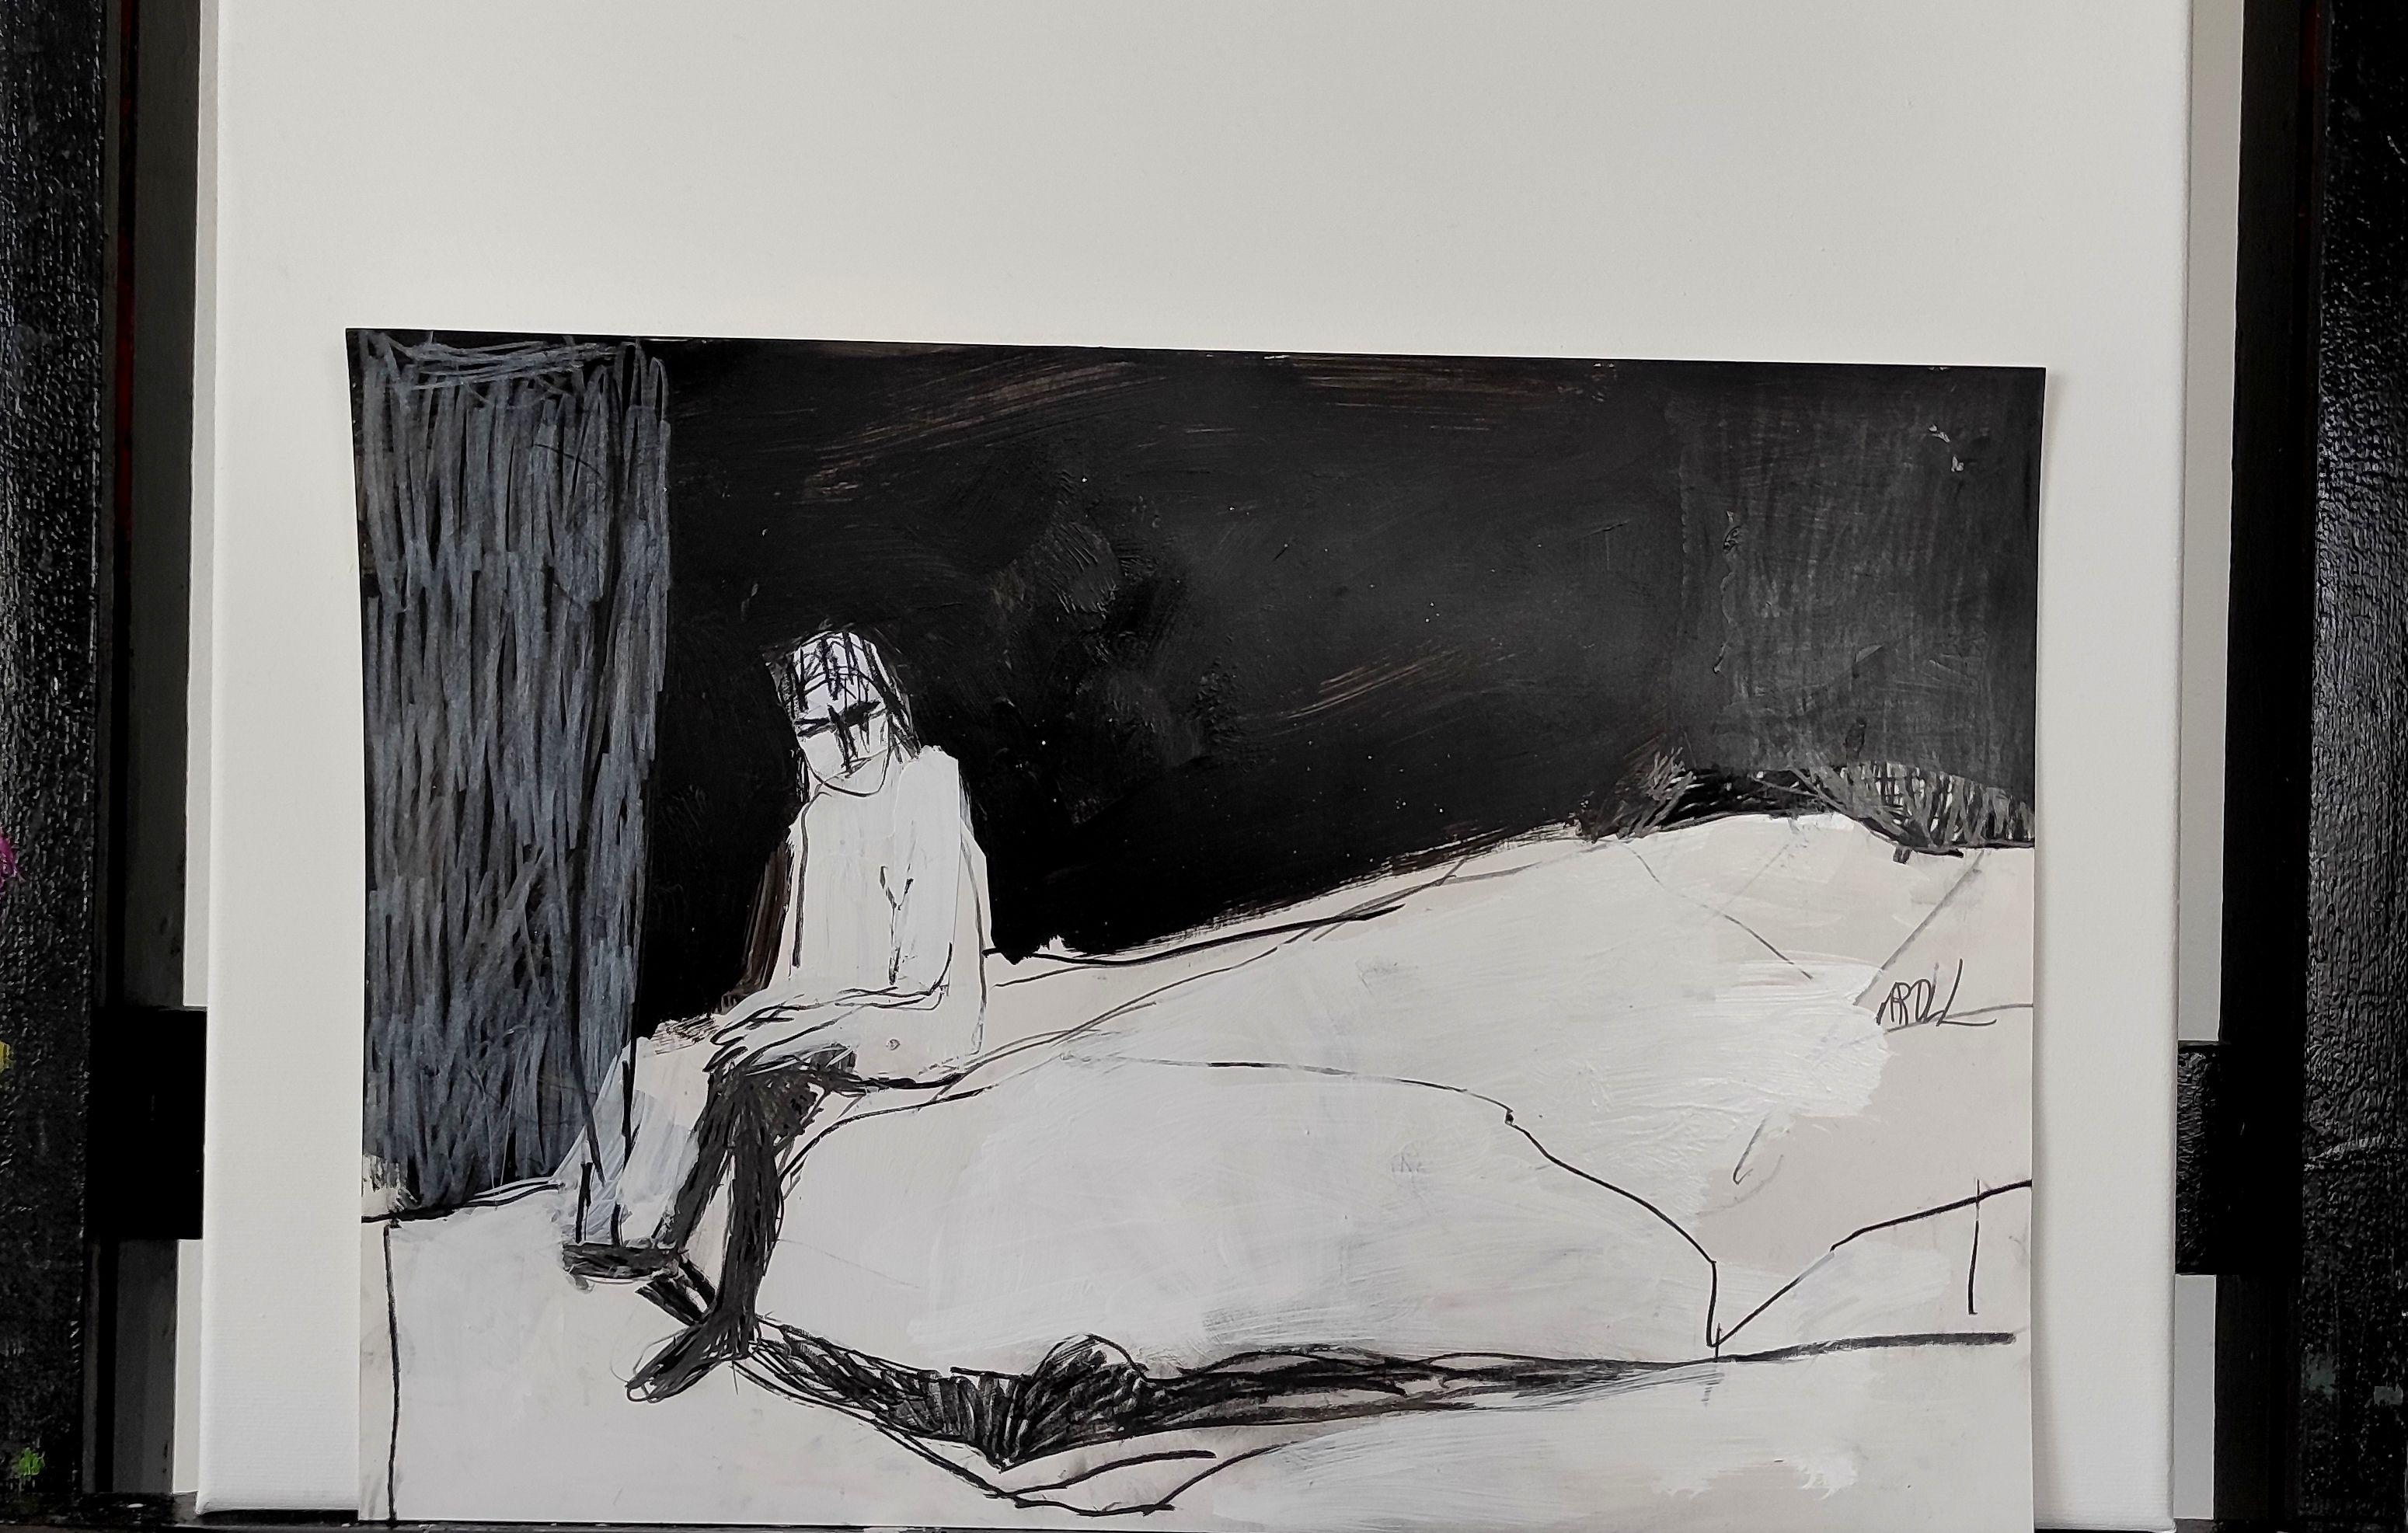 Alone in the bedroom, Drawing, Pencil/Colored Pencil on Paper - Expressionist Art by Barbara Kroll